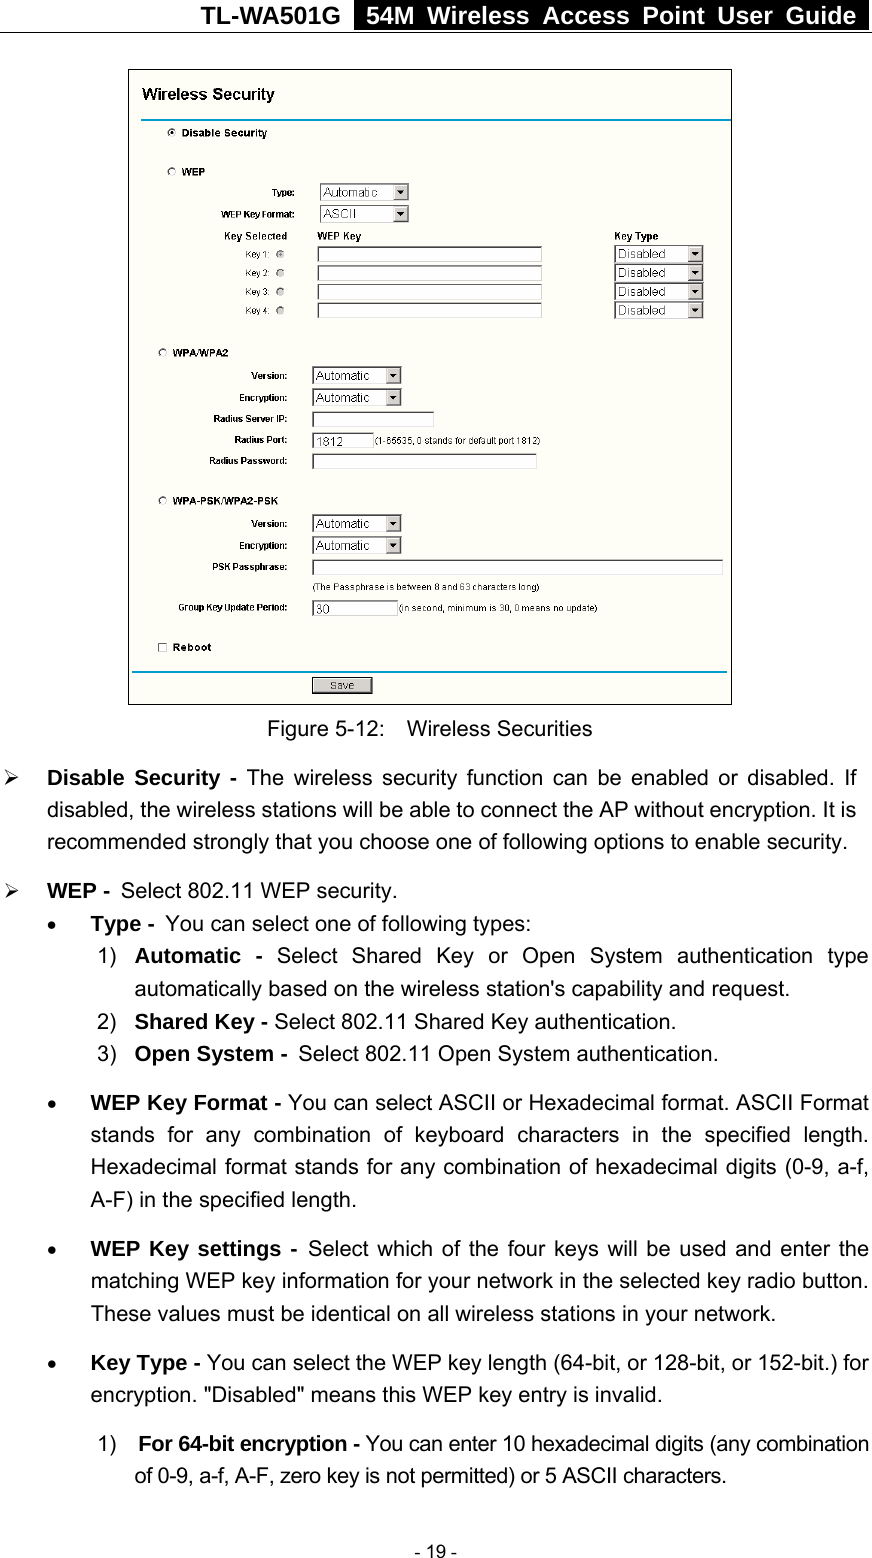 TL-WA501G   54M Wireless Access Point User Guide   Figure 5-12:  Wireless Securities ¾ Disable Security - The wireless security function can be enabled or disabled. If disabled, the wireless stations will be able to connect the AP without encryption. It is recommended strongly that you choose one of following options to enable security. ¾ WEP - Select 802.11 WEP security. • Type - You can select one of following types: 1)  Automatic - Select Shared Key or Open System authentication type automatically based on the wireless station&apos;s capability and request.   2)  Shared Key - Select 802.11 Shared Key authentication.   3)  Open System - Select 802.11 Open System authentication.  • WEP Key Format - You can select ASCII or Hexadecimal format. ASCII Format stands for any combination of keyboard characters in the specified length. Hexadecimal format stands for any combination of hexadecimal digits (0-9, a-f, A-F) in the specified length. • WEP Key settings - Select which of the four keys will be used and enter the matching WEP key information for your network in the selected key radio button. These values must be identical on all wireless stations in your network.   • Key Type - You can select the WEP key length (64-bit, or 128-bit, or 152-bit.) for encryption. &quot;Disabled&quot; means this WEP key entry is invalid. 1)  For 64-bit encryption - You can enter 10 hexadecimal digits (any combination of 0-9, a-f, A-F, zero key is not permitted) or 5 ASCII characters.    - 19 - 